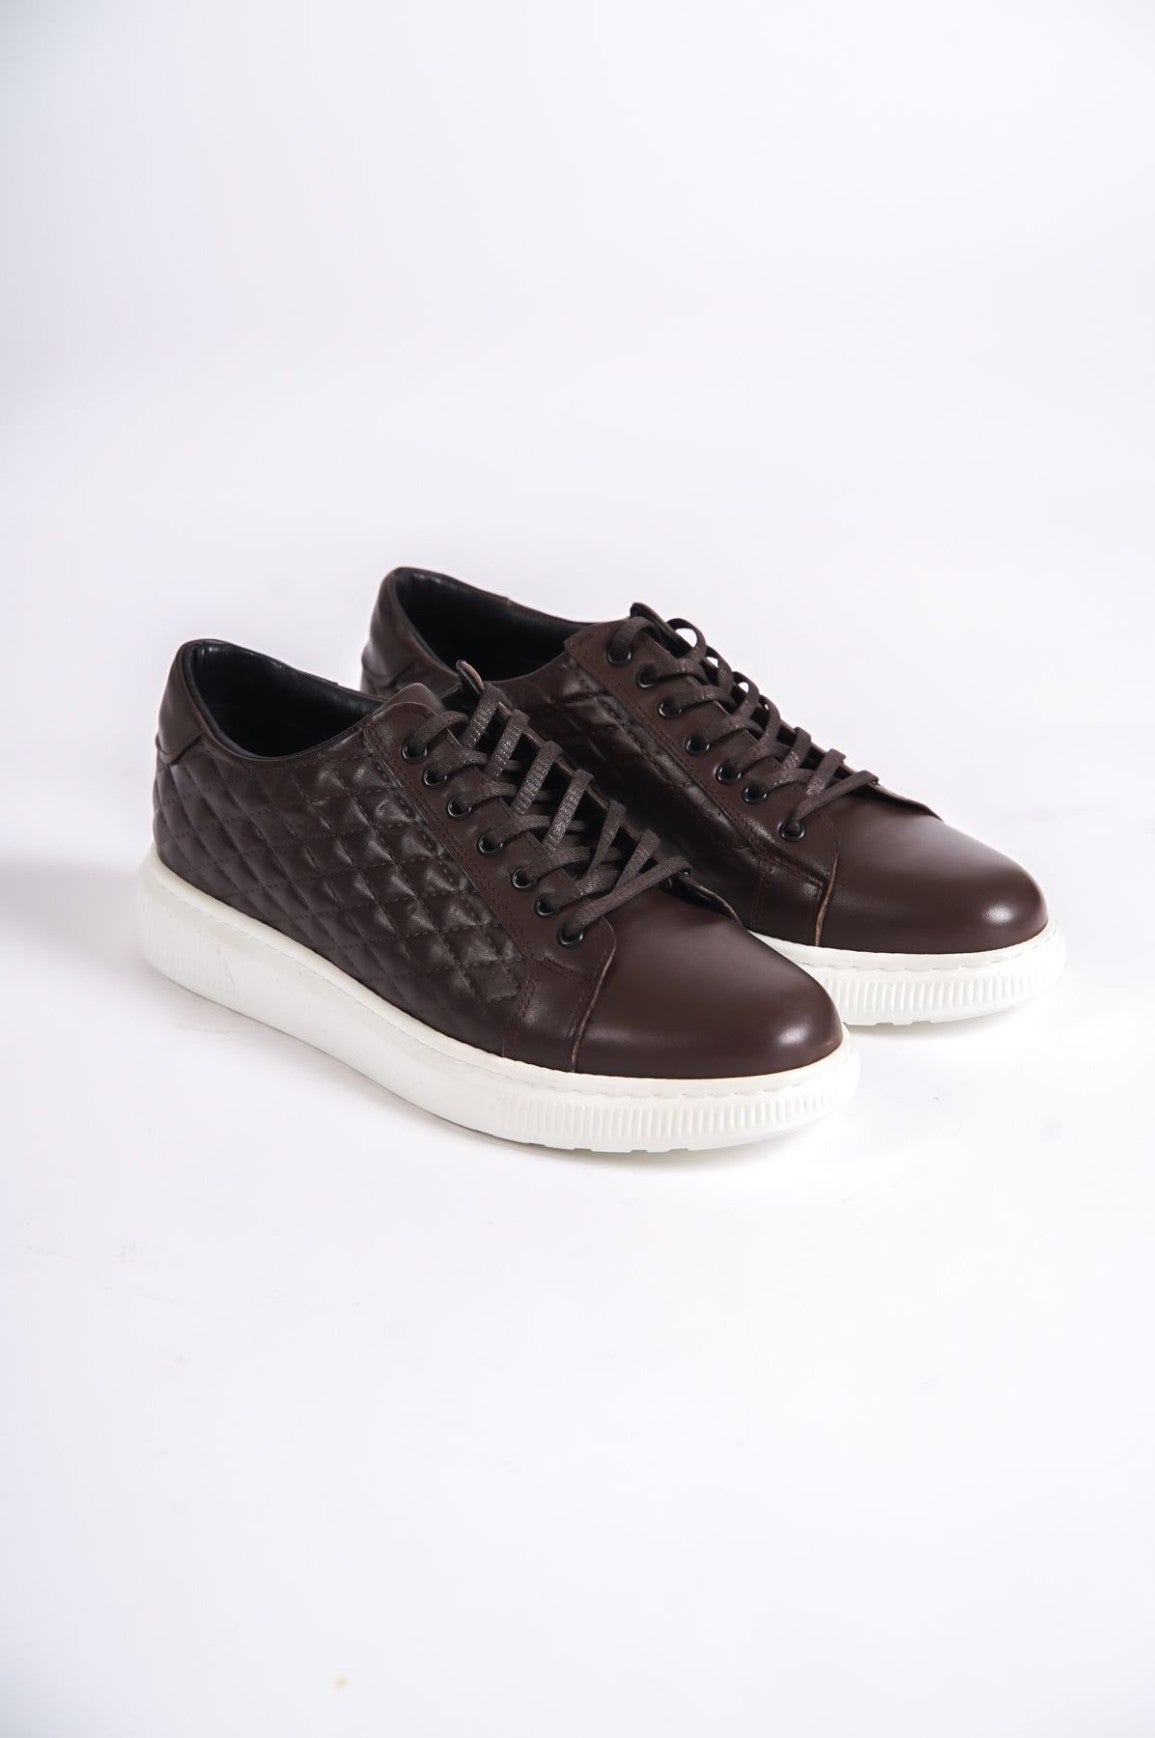 BA0311 Inside Out Genuine Leather Quilted Patterned Lace-Up Brown Classic Men's Shoes - STREETMODE™